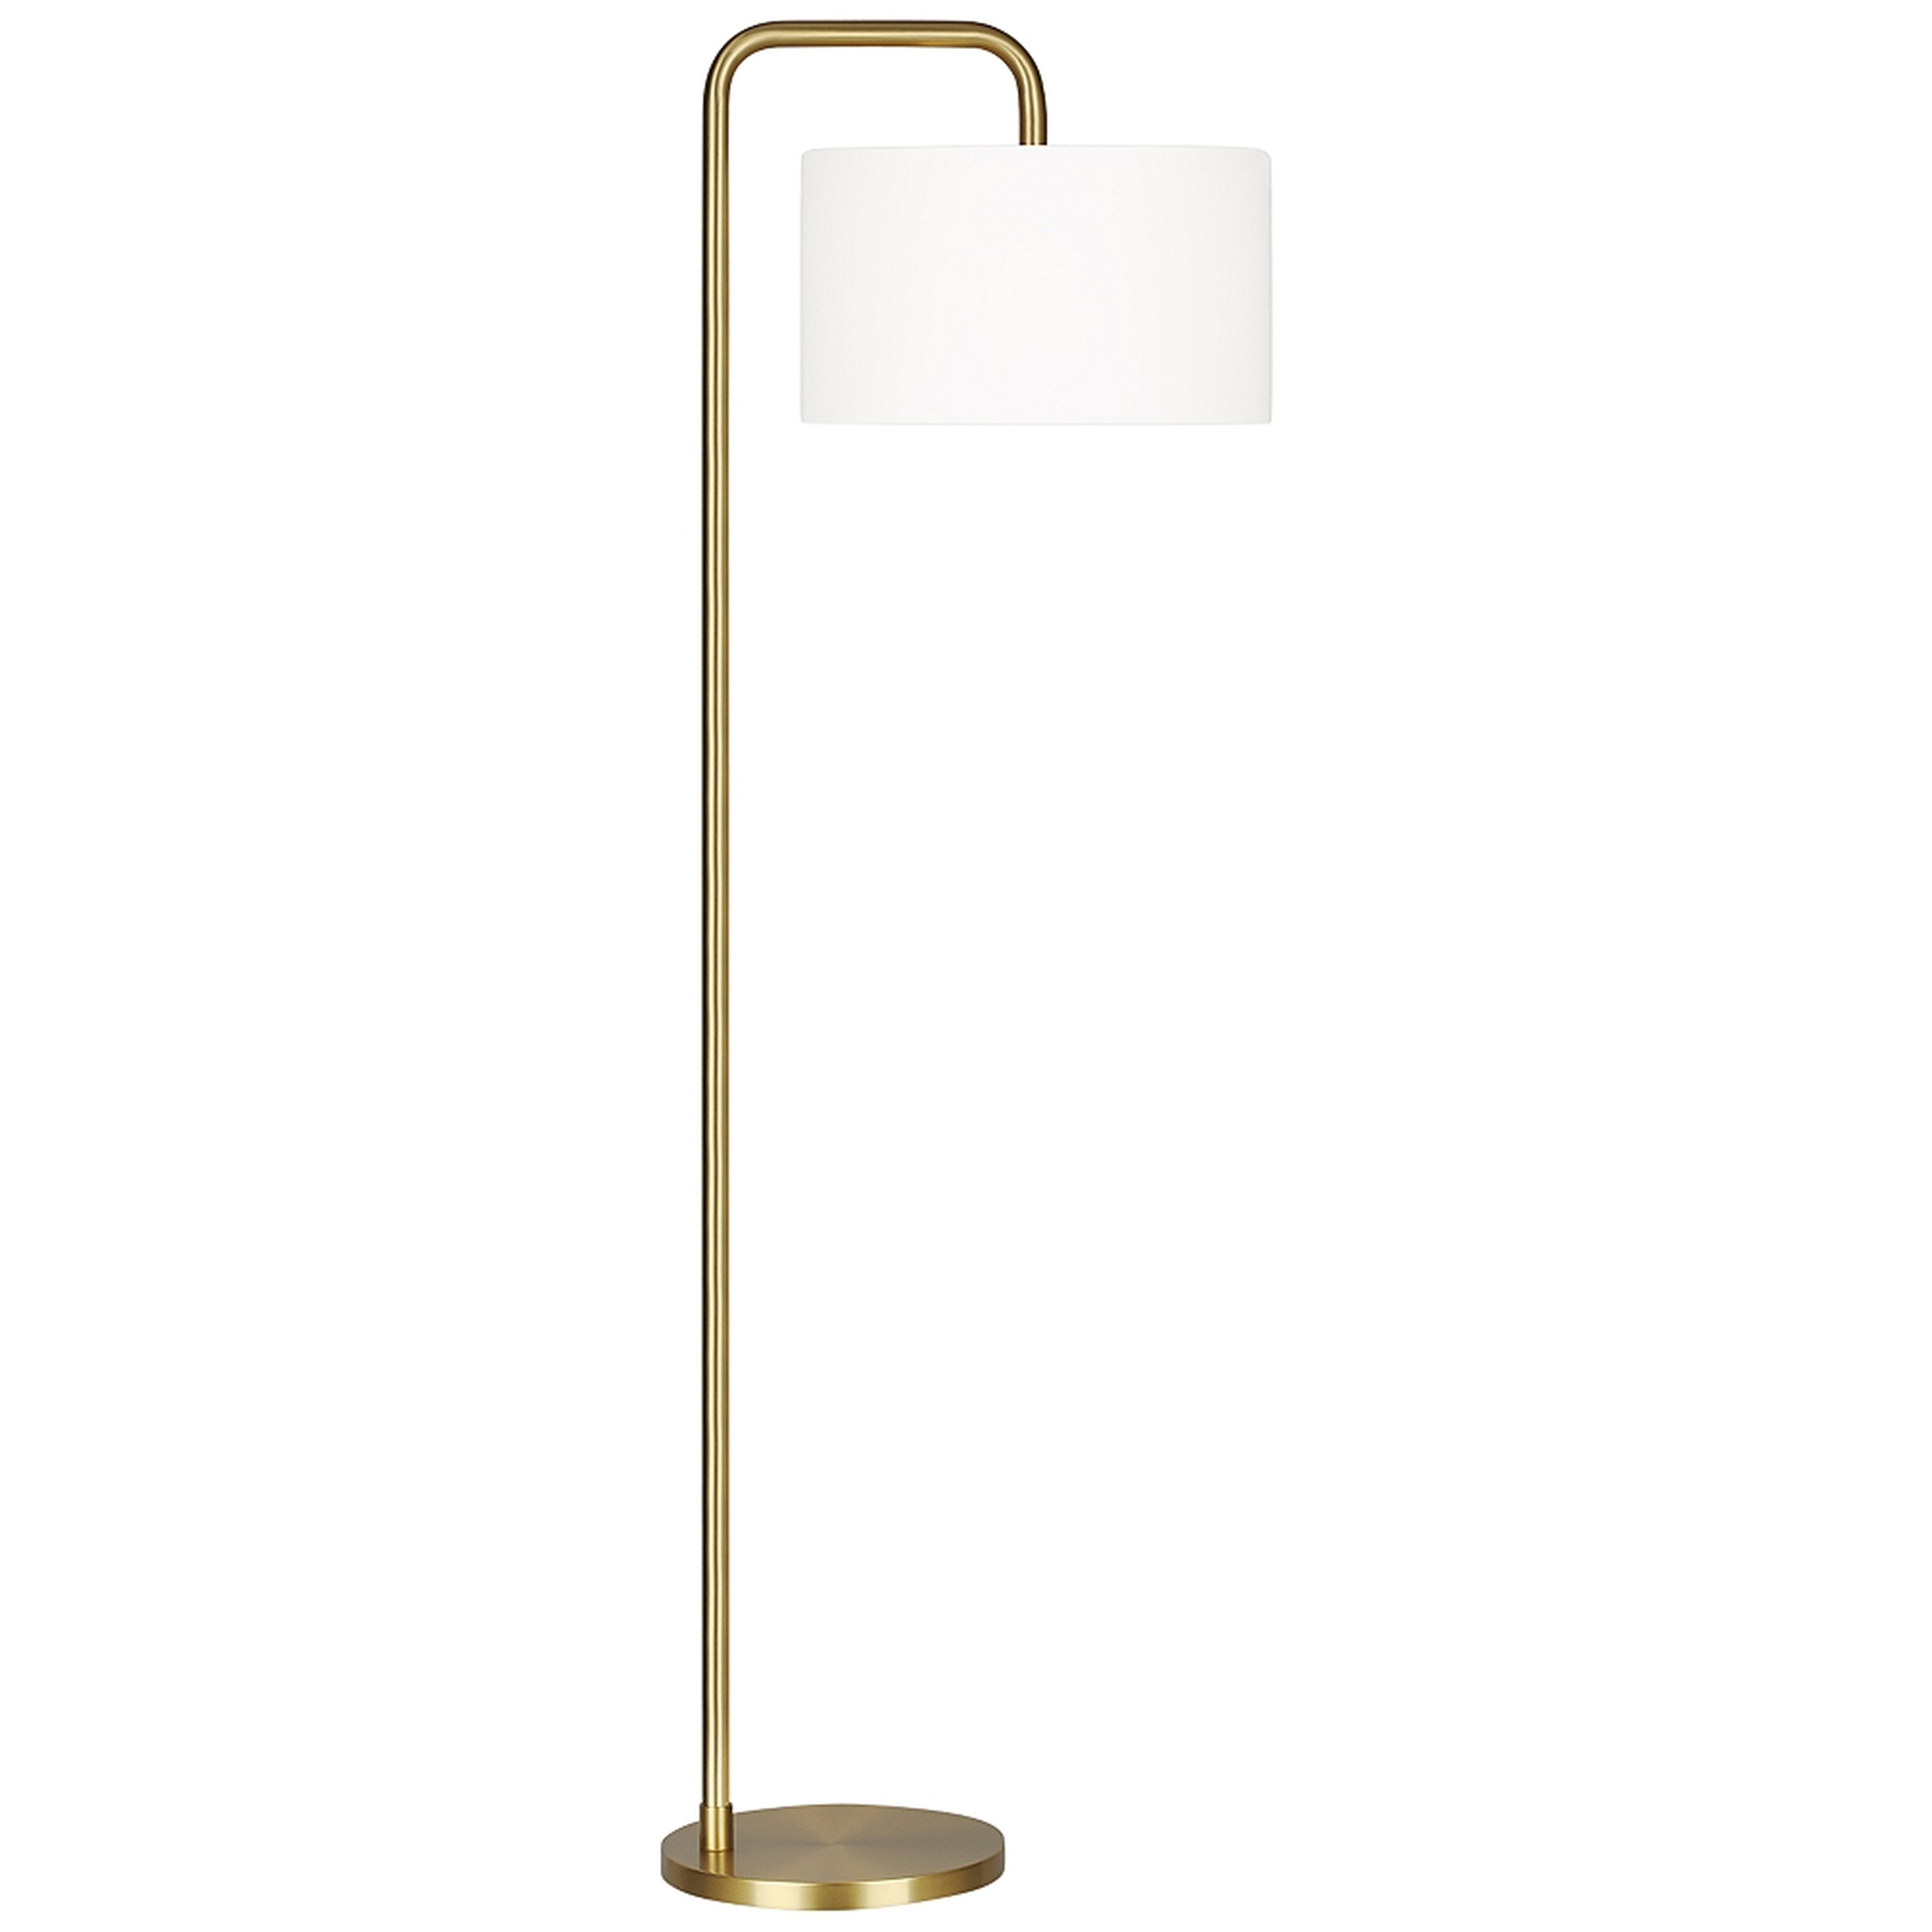 Dean Burnished Brass LED Floor Lamp - Style # 97E94 - Lamps Plus